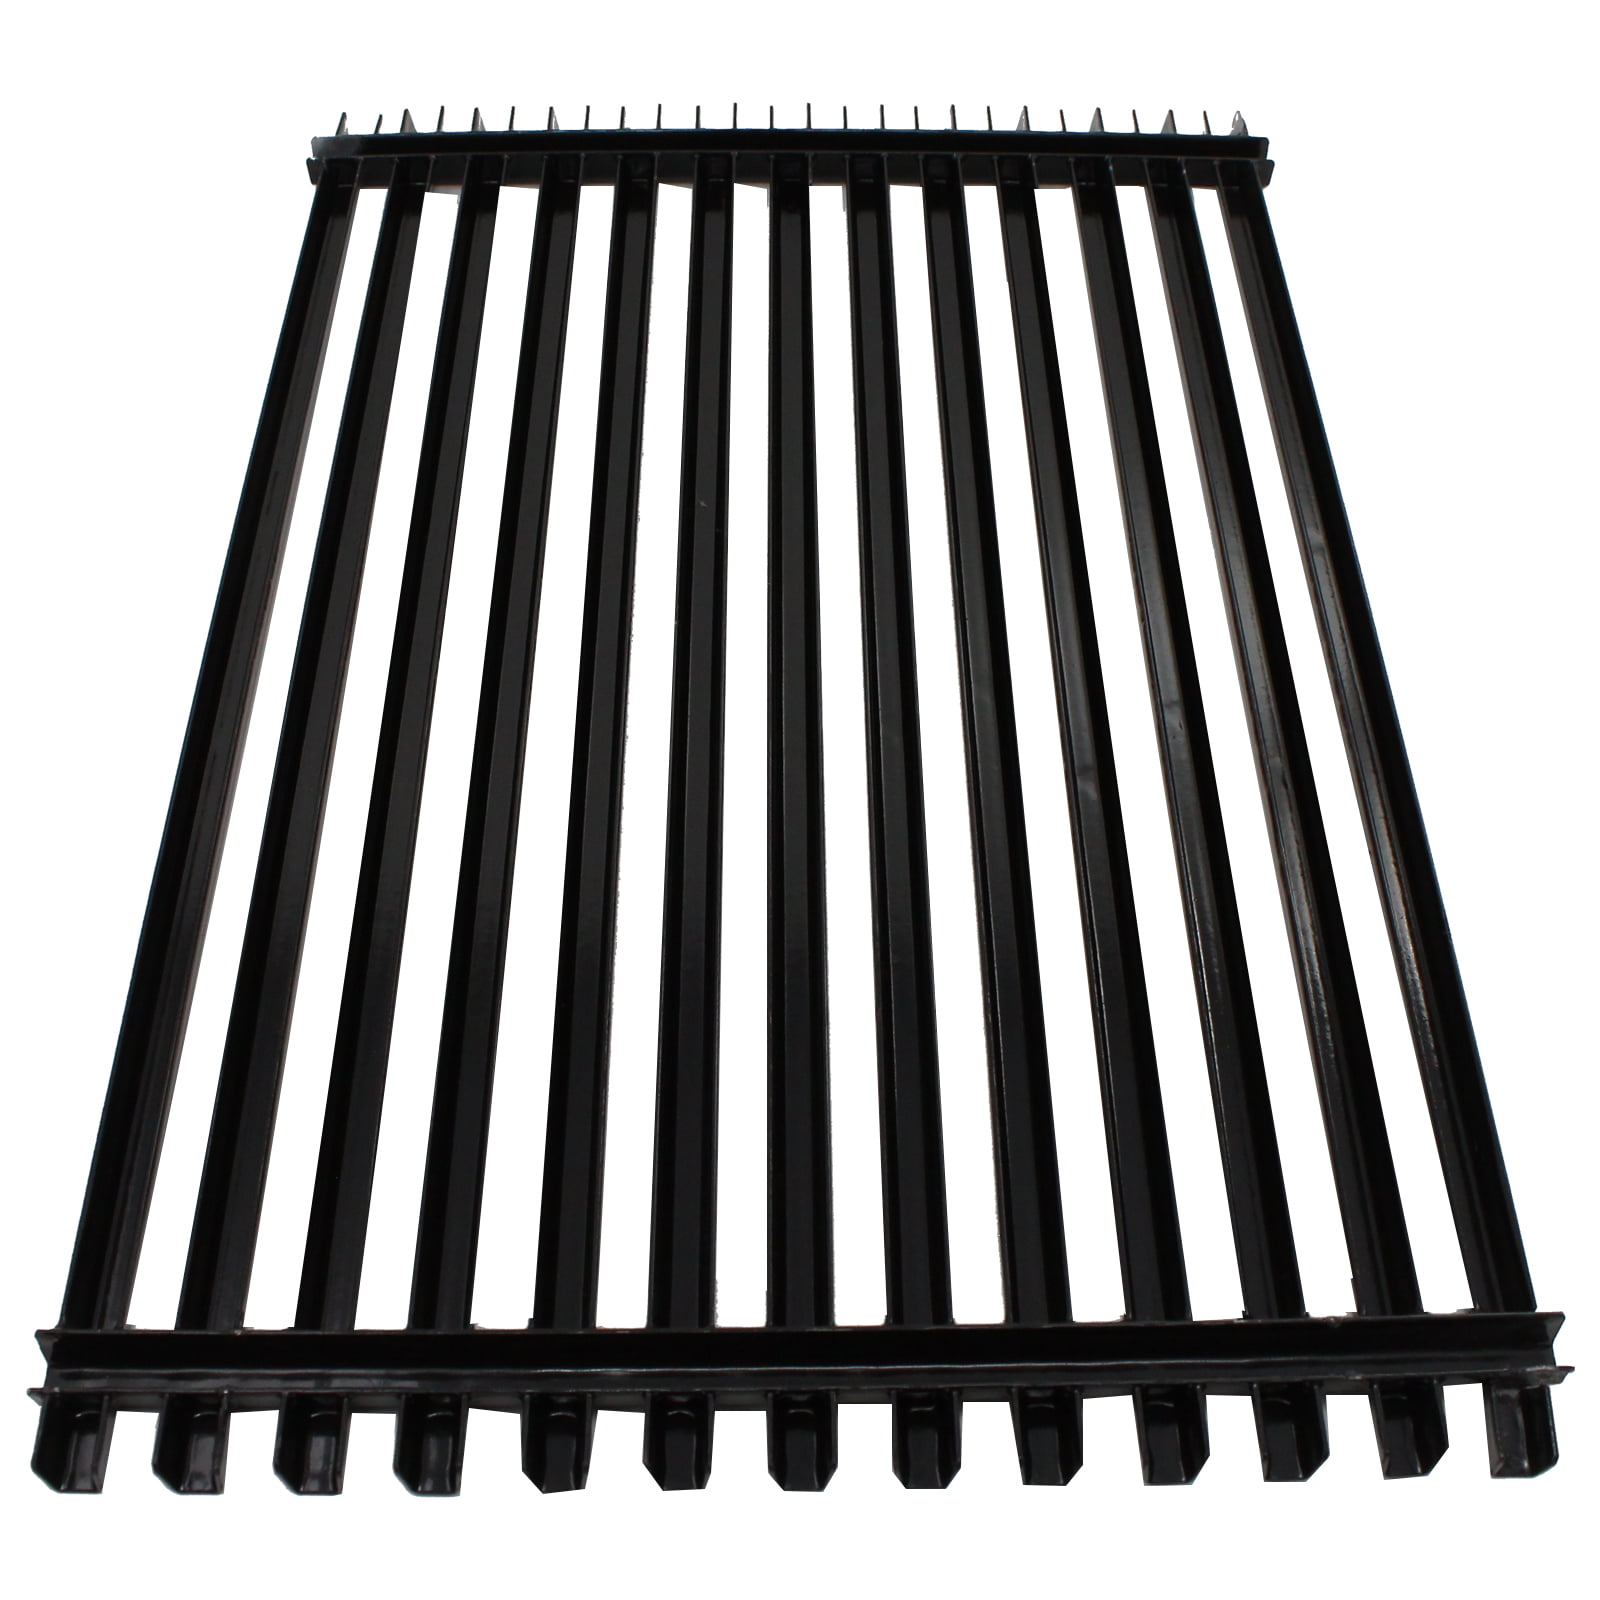 BBQ Grill Cooking Grates Replacement Parts for Weber Spirit E 310